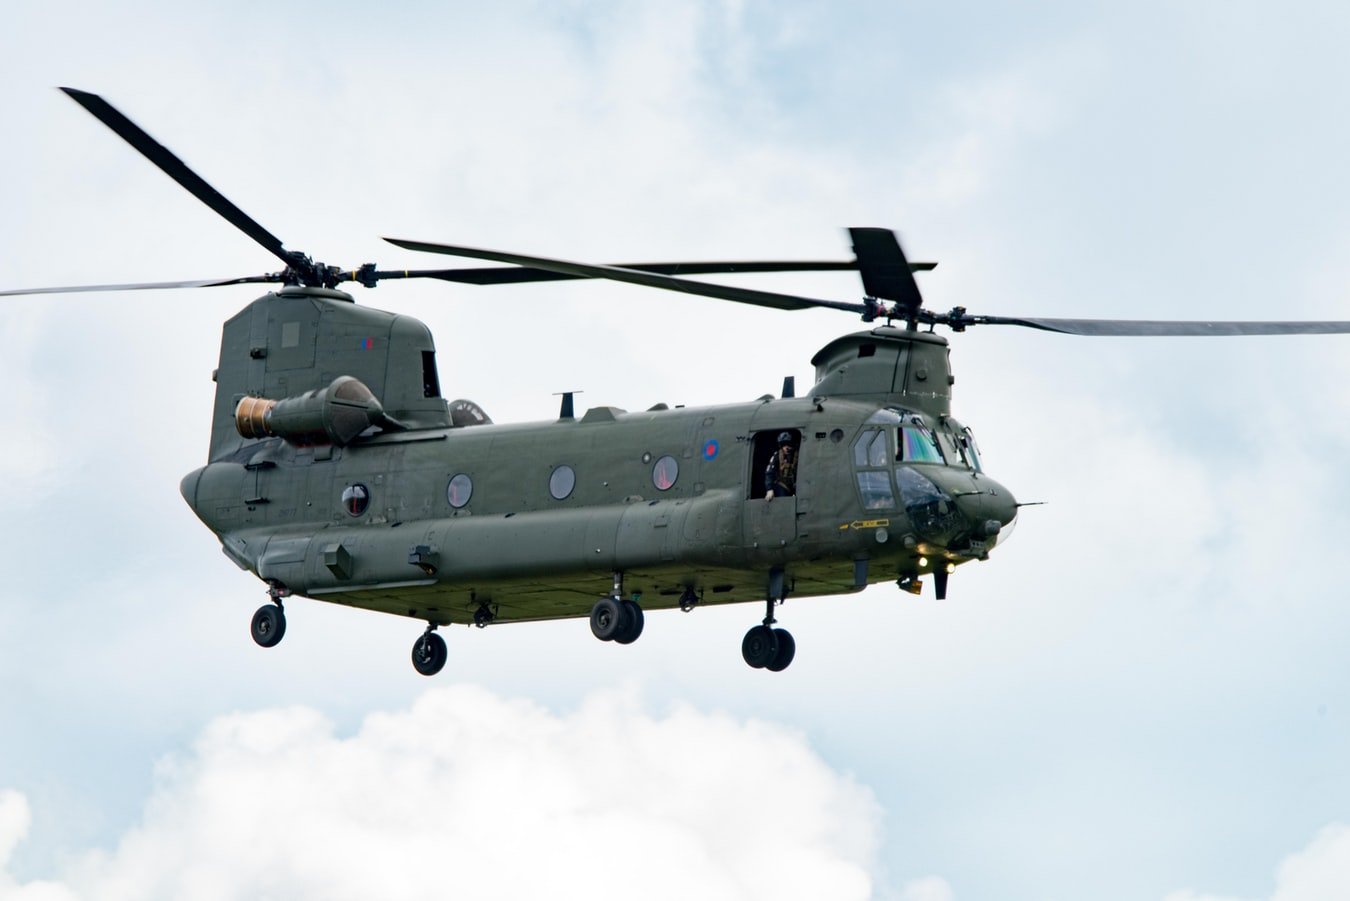 What is a Chinook and what does it do?